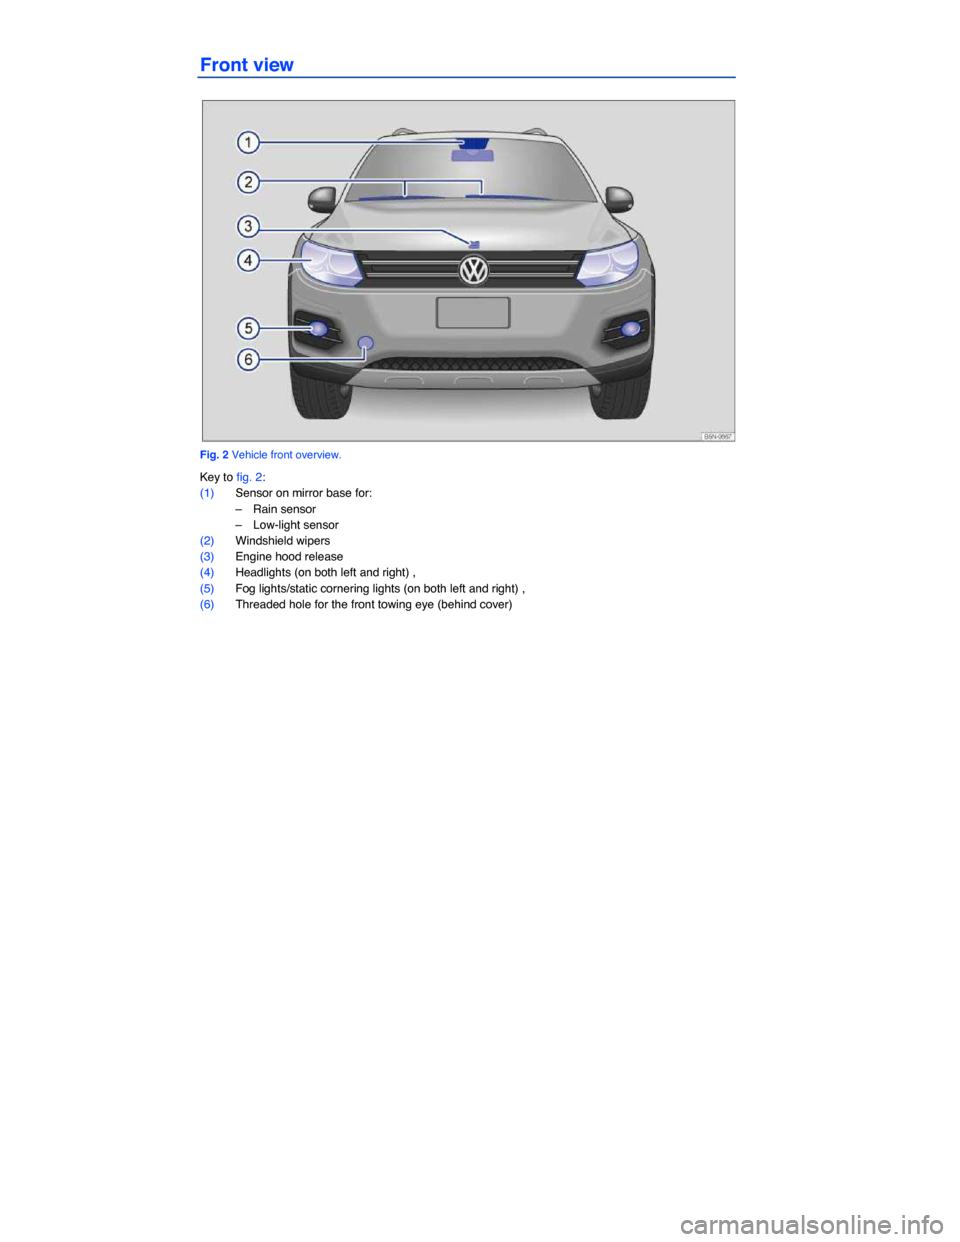 VOLKSWAGEN TIGUAN 2015 1.G Owners Manual  
Front view 
 
Fig. 2 Vehicle front overview. 
Key to fig. 2: 
(1) Sensor on mirror base for: 
–  Rain sensor  
–  Low-light sensor  
(2) Windshield wipers  
(3) Engine hood release  
(4) Headlig